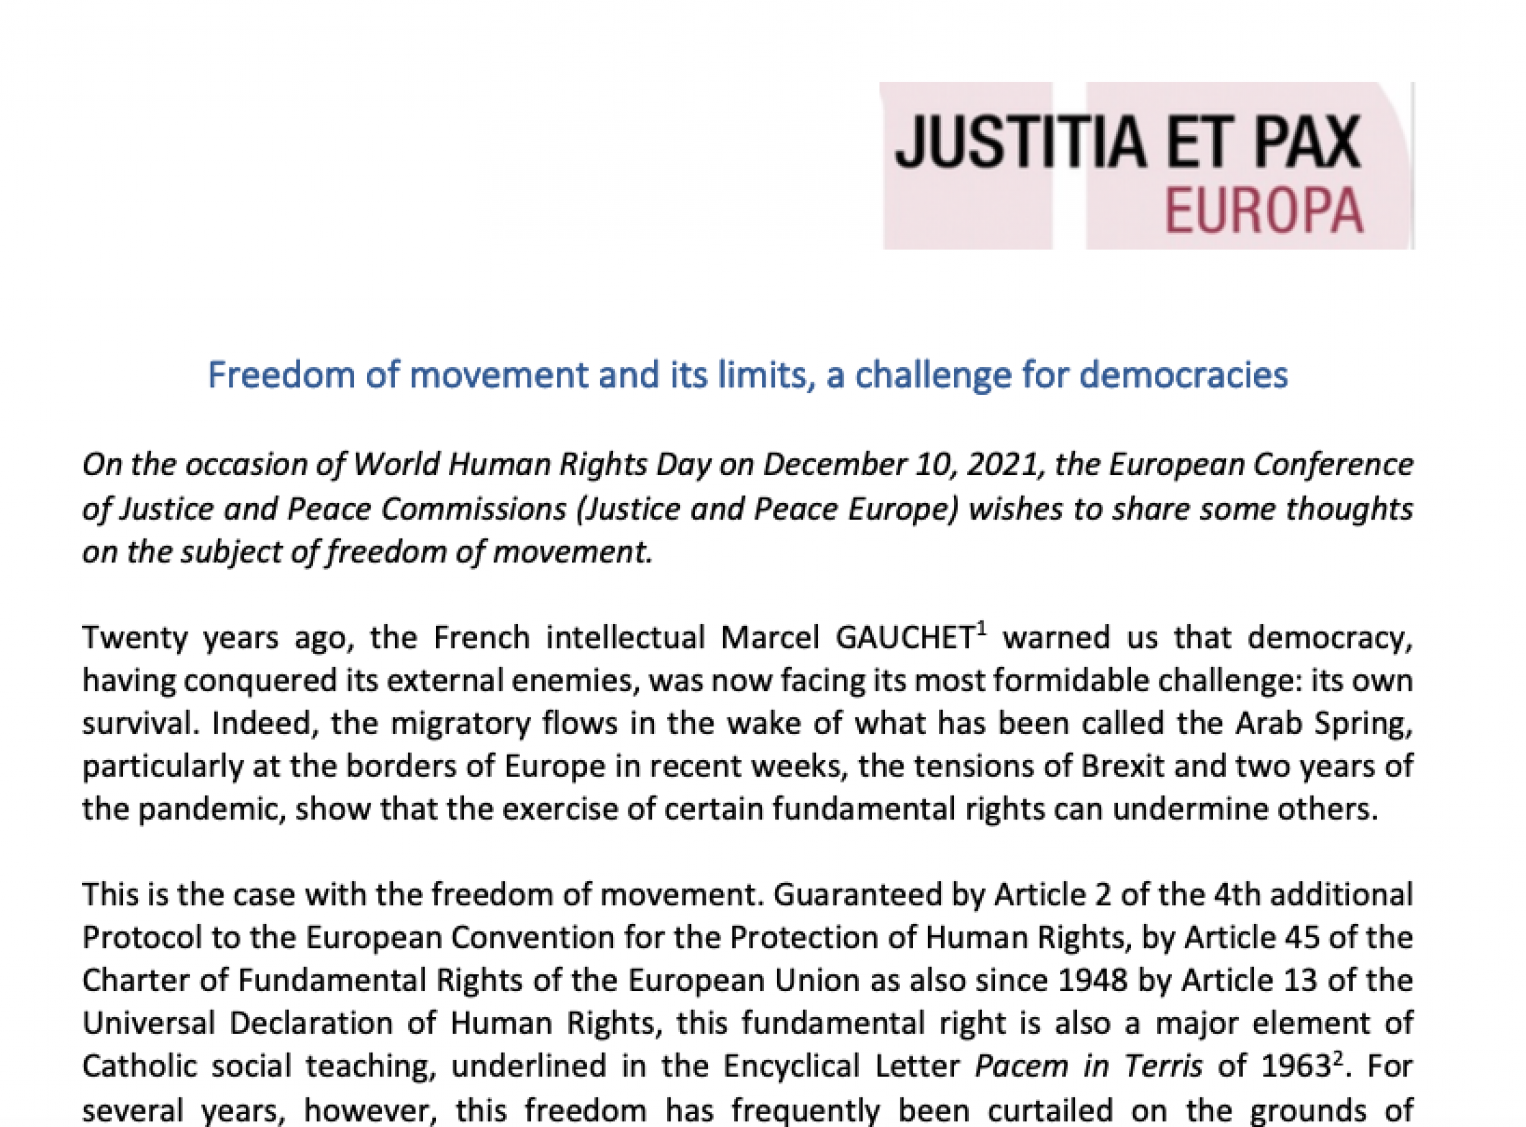 Freedom of movement and its limits, a challenge for democracies